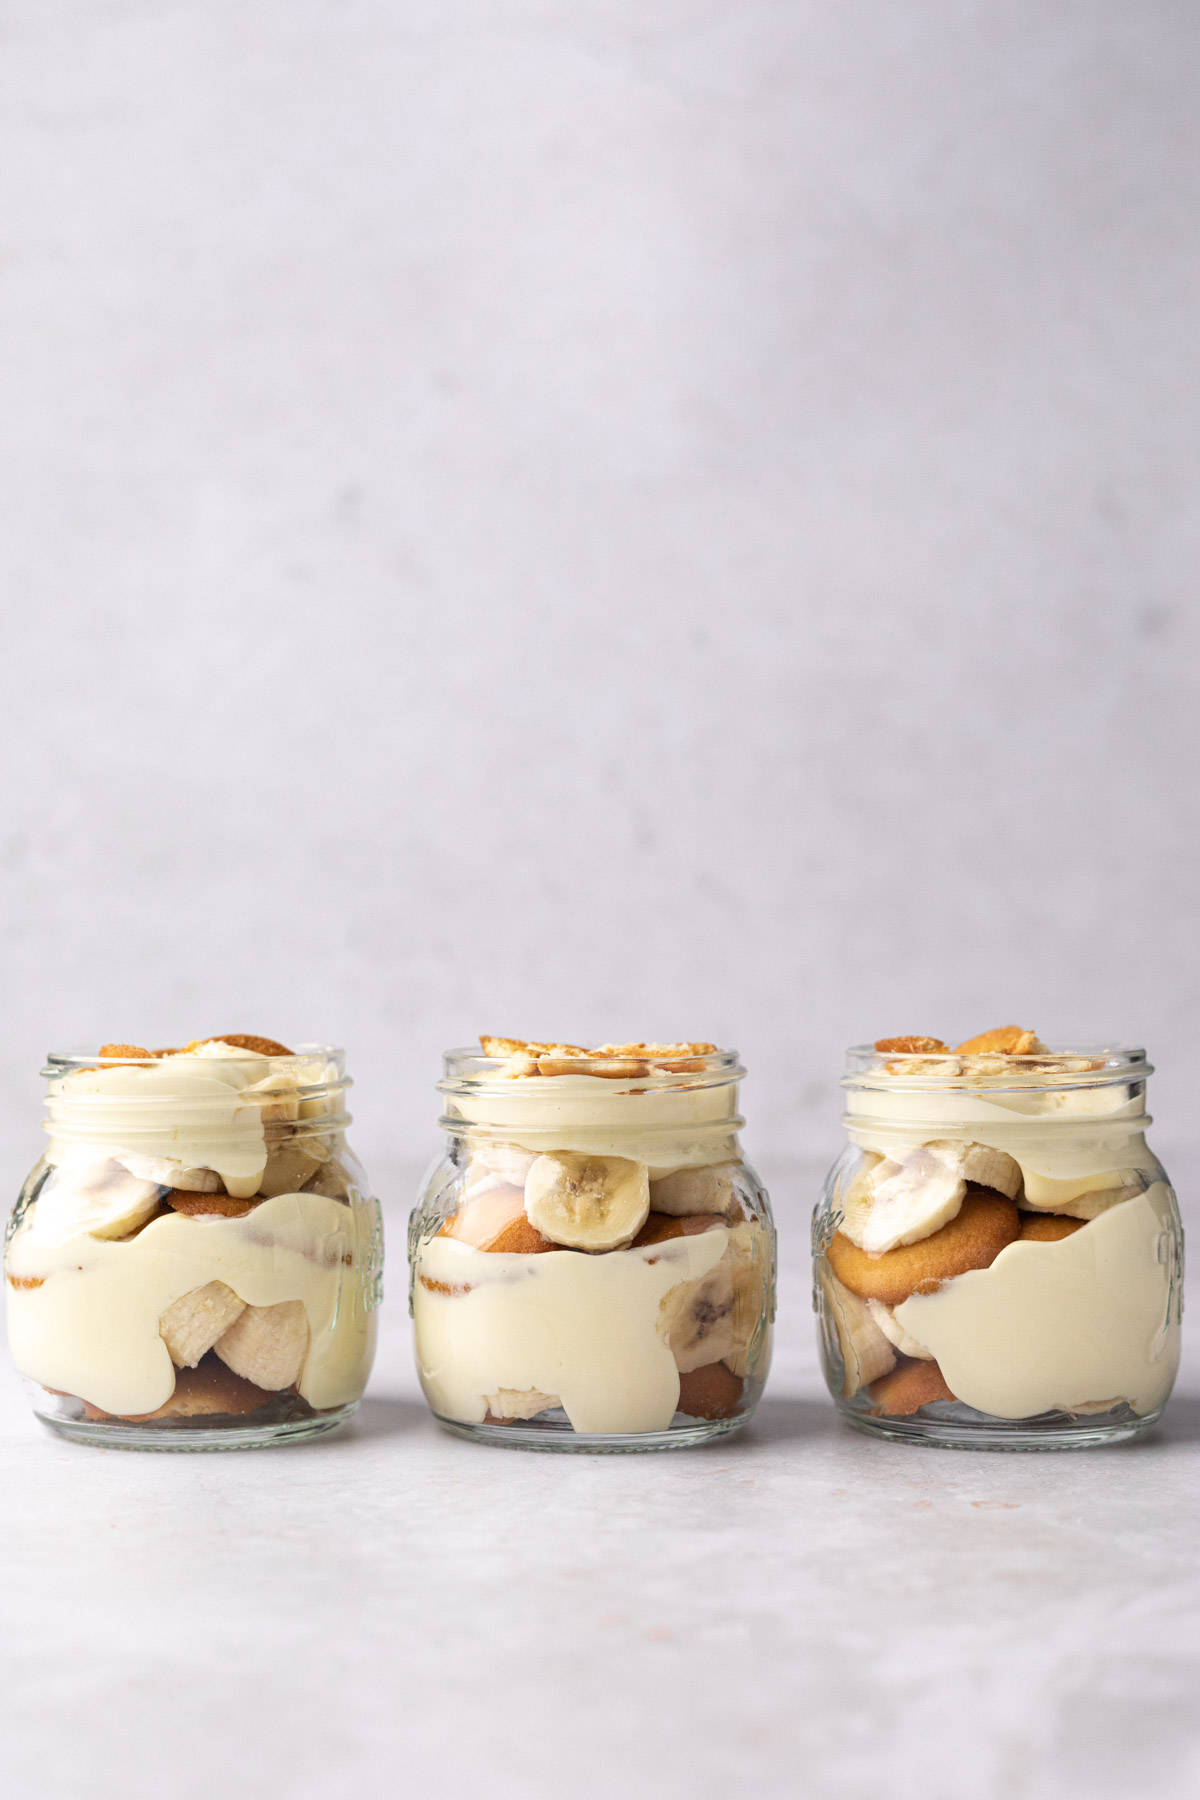 Three jars of banana pudding in a line topped with crushed vanilla wafers.